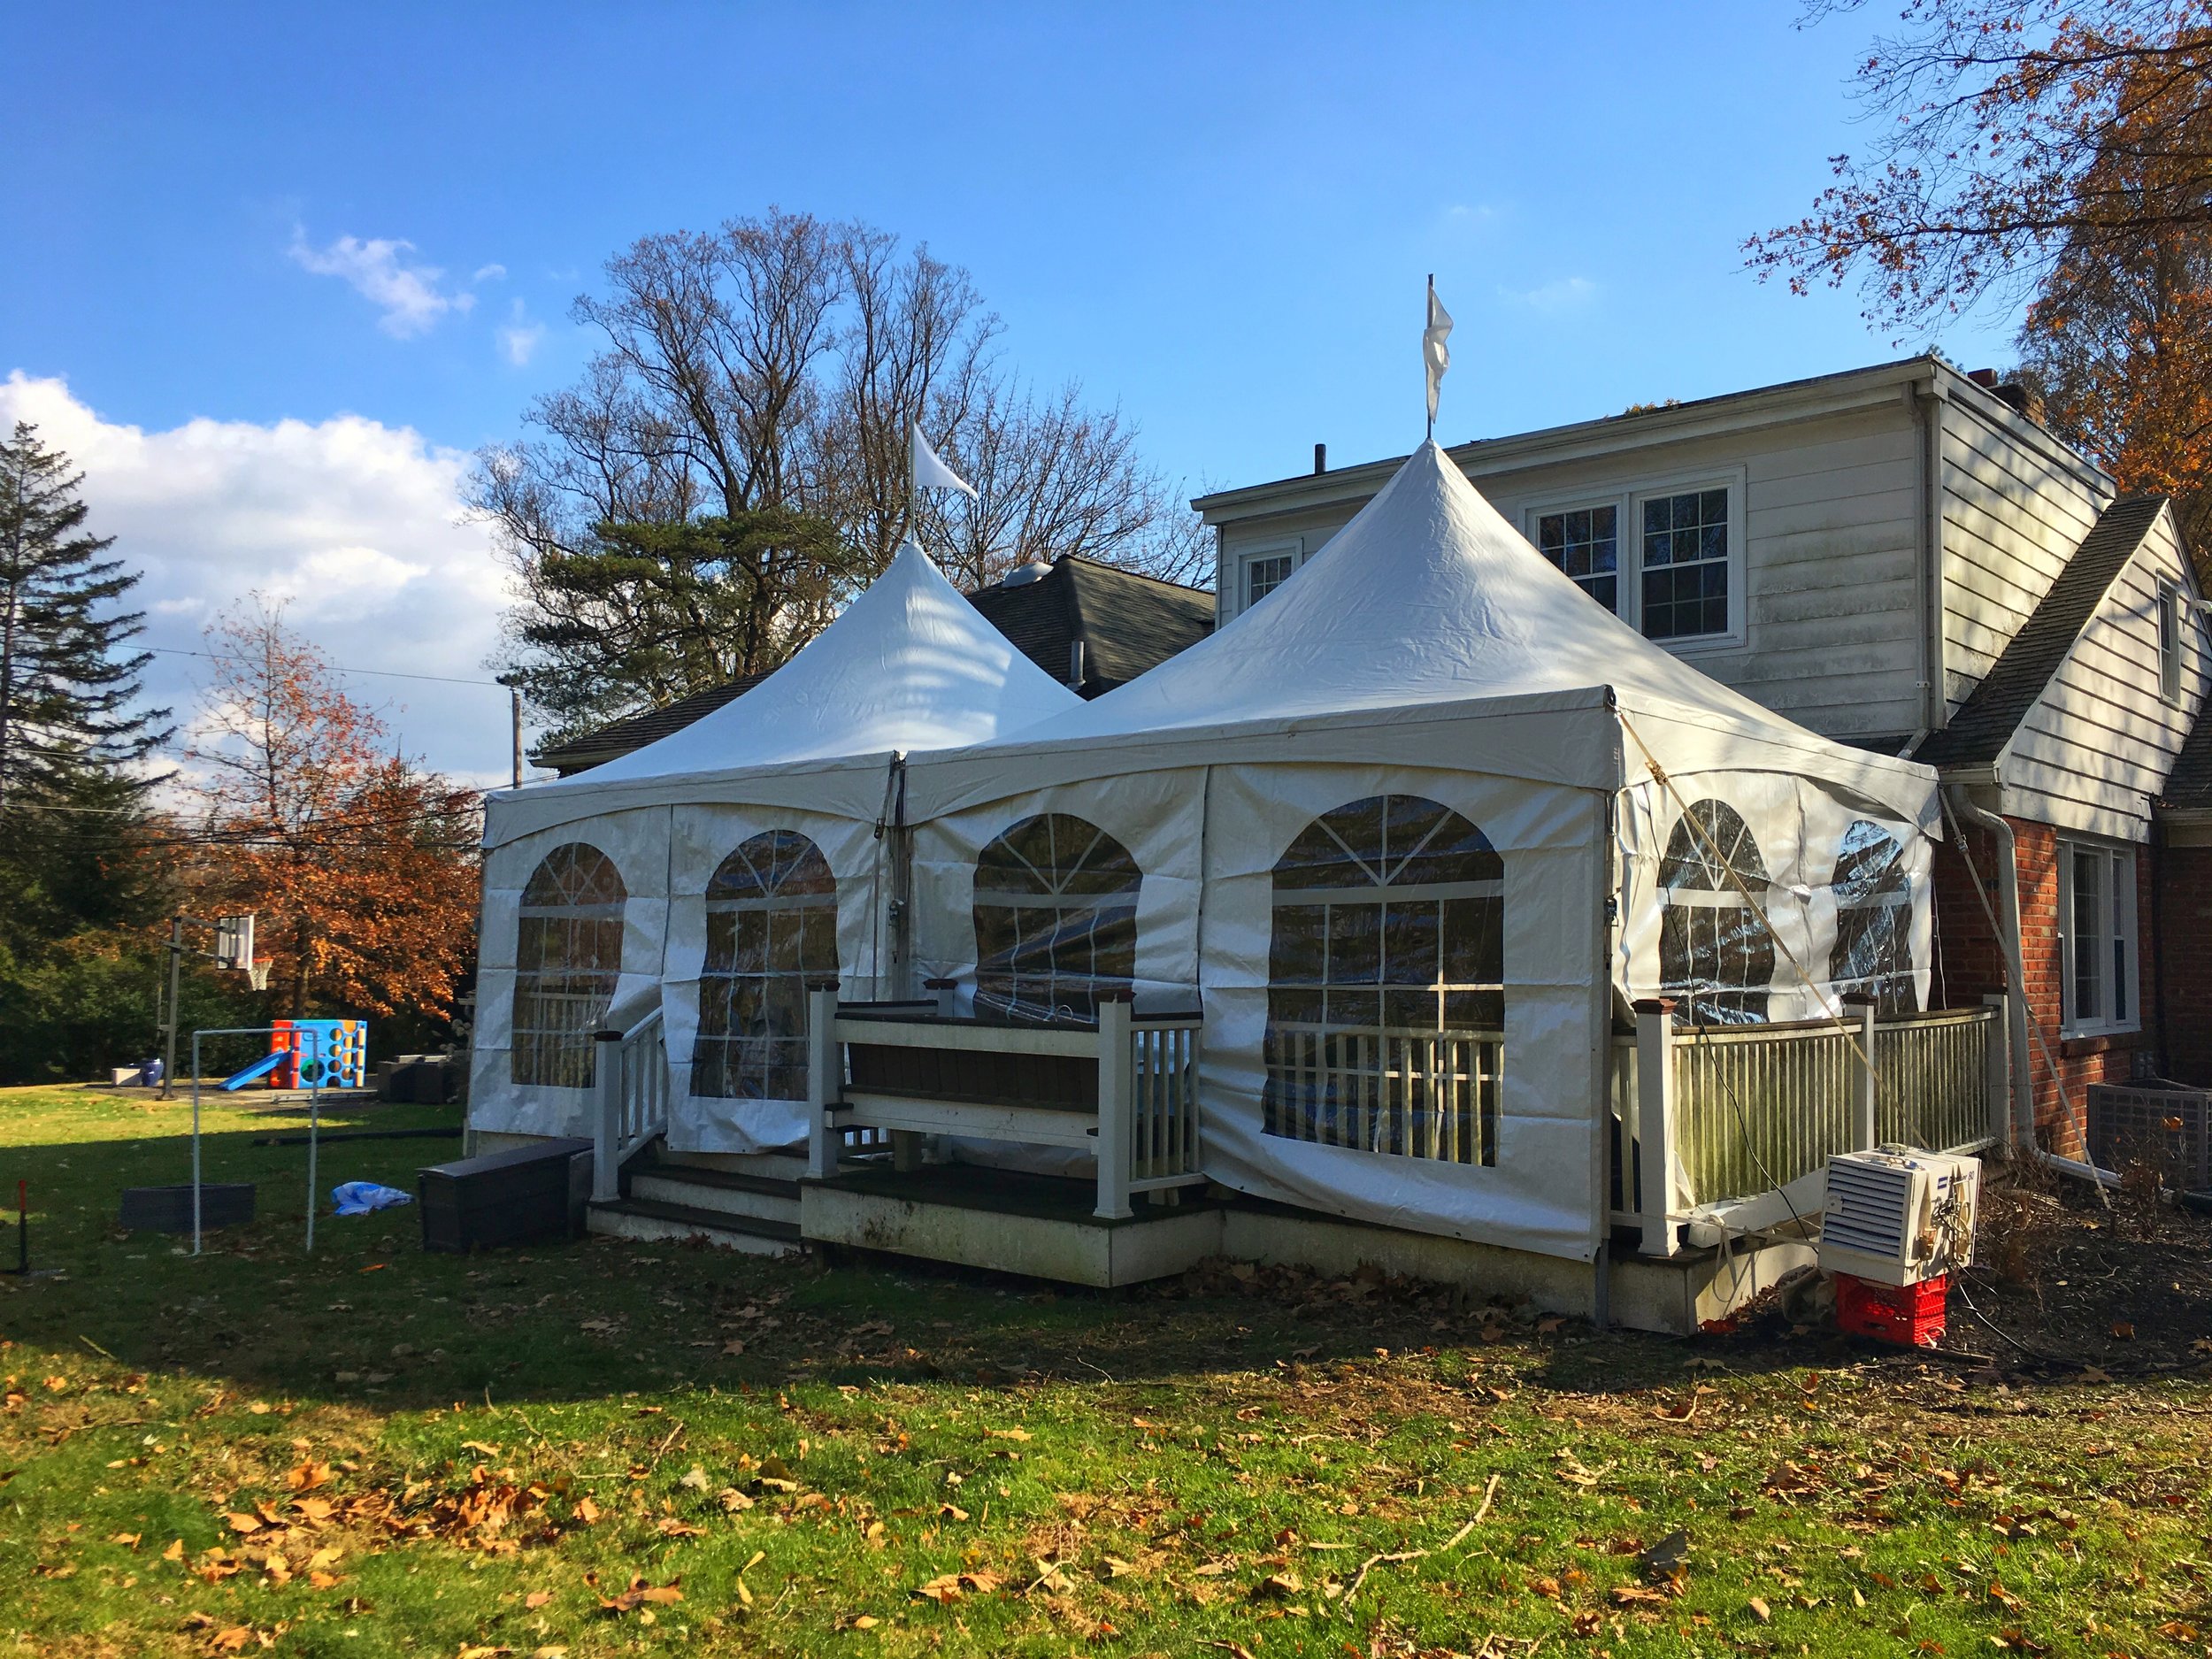 Nice backyard frame tent for rent in Cherry Hill, NJ